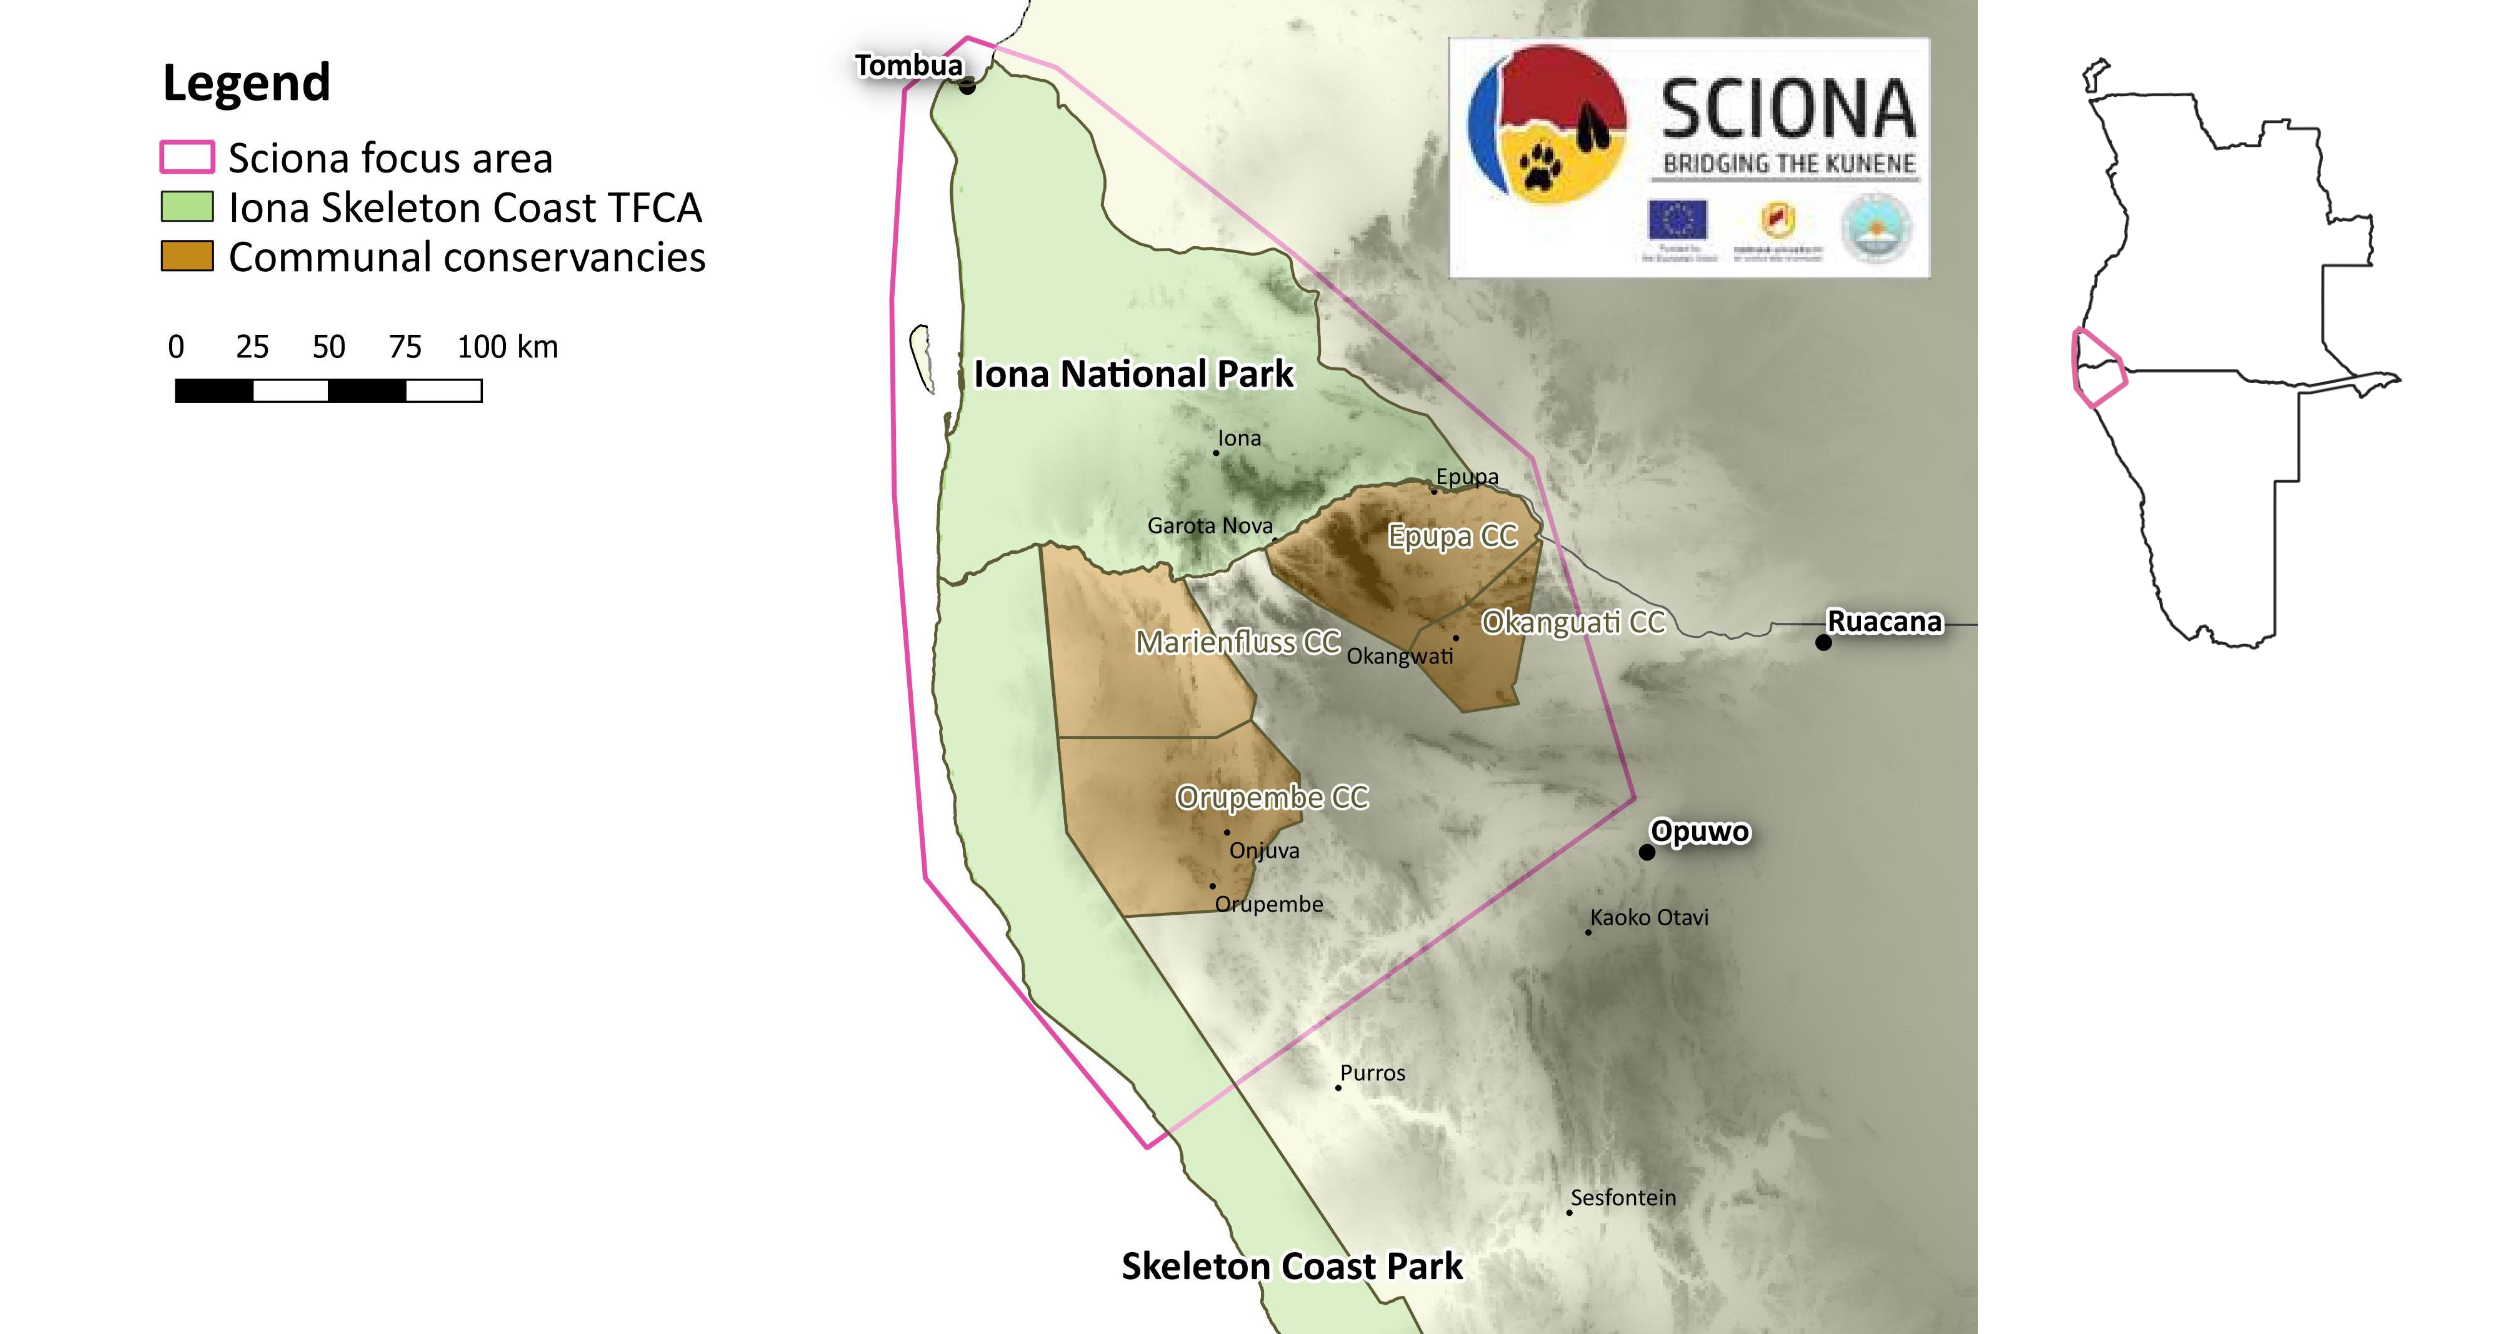 Maps showing the location of the SCIONA project.